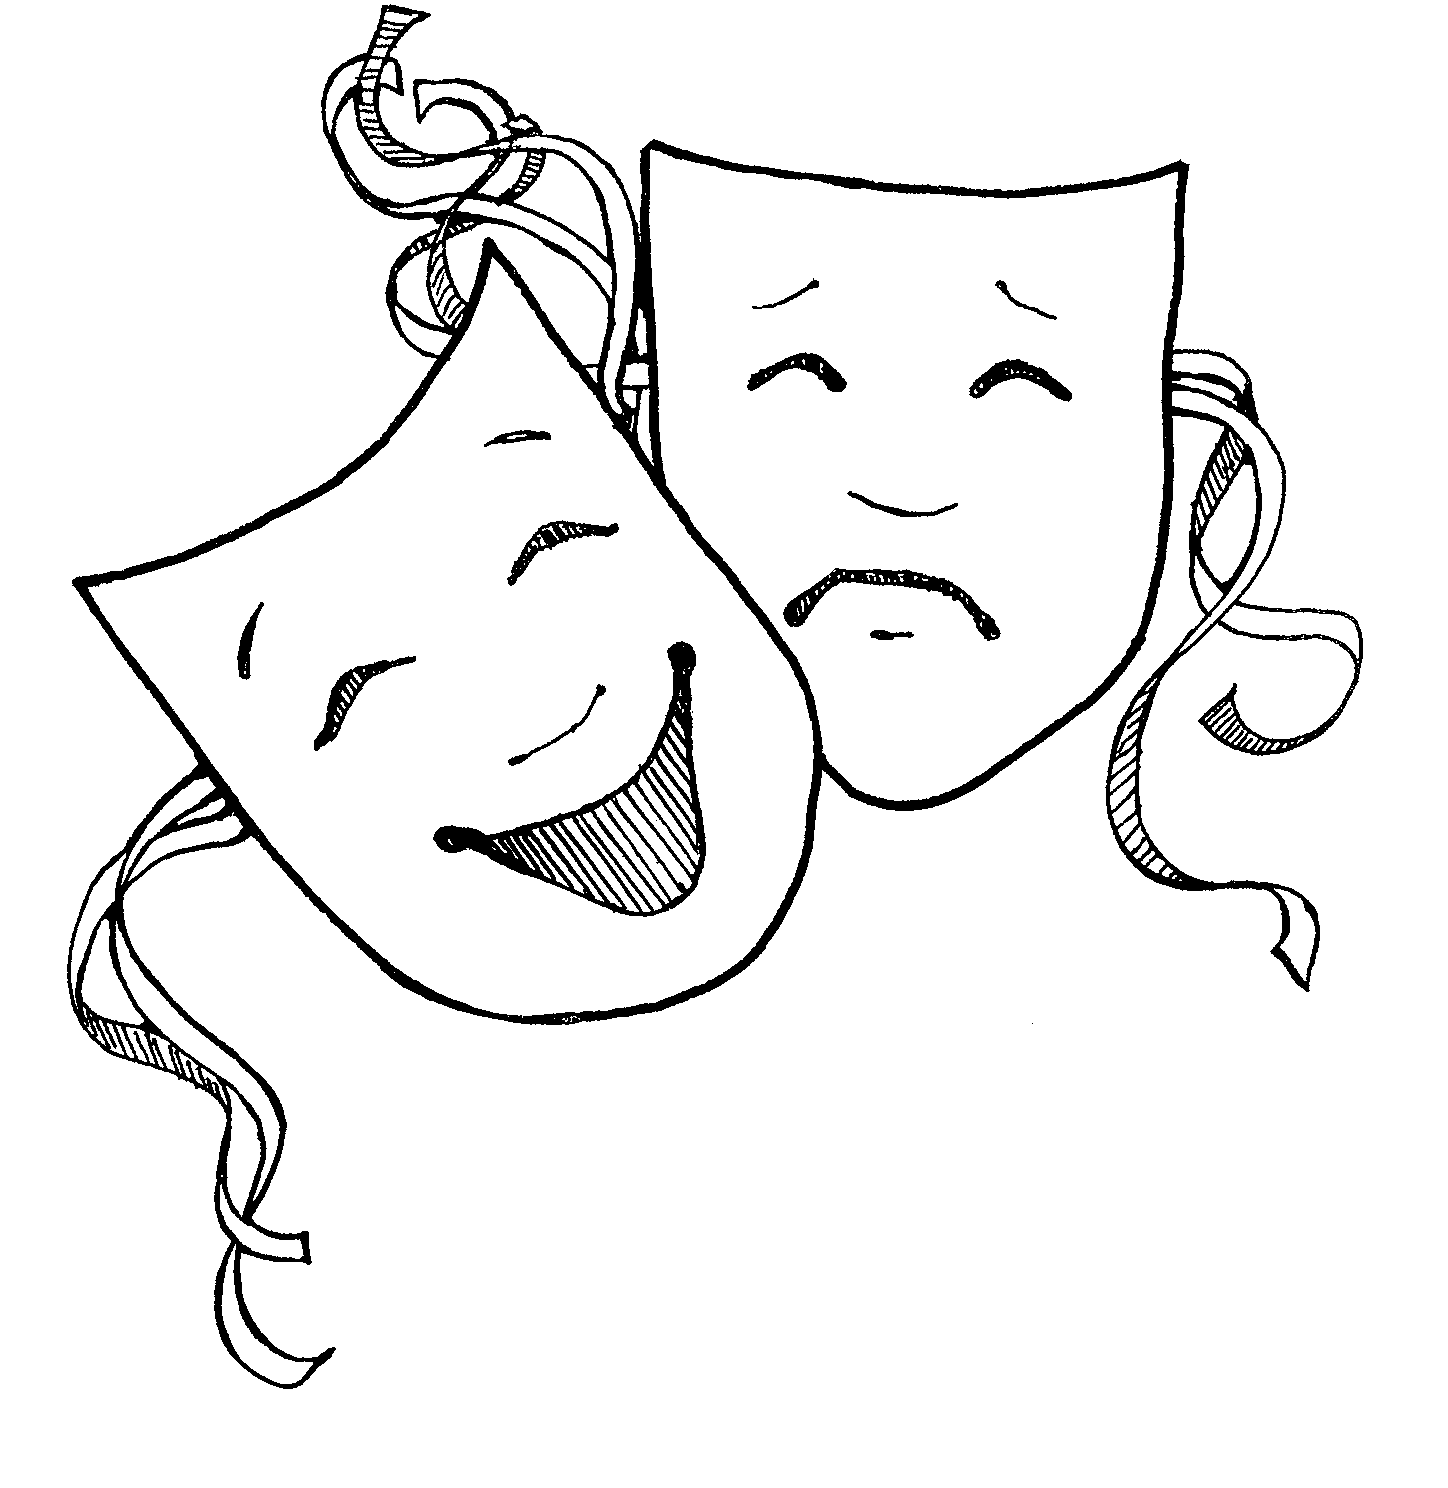 Free Drama Clipart Black And White, Download Free Clip Art